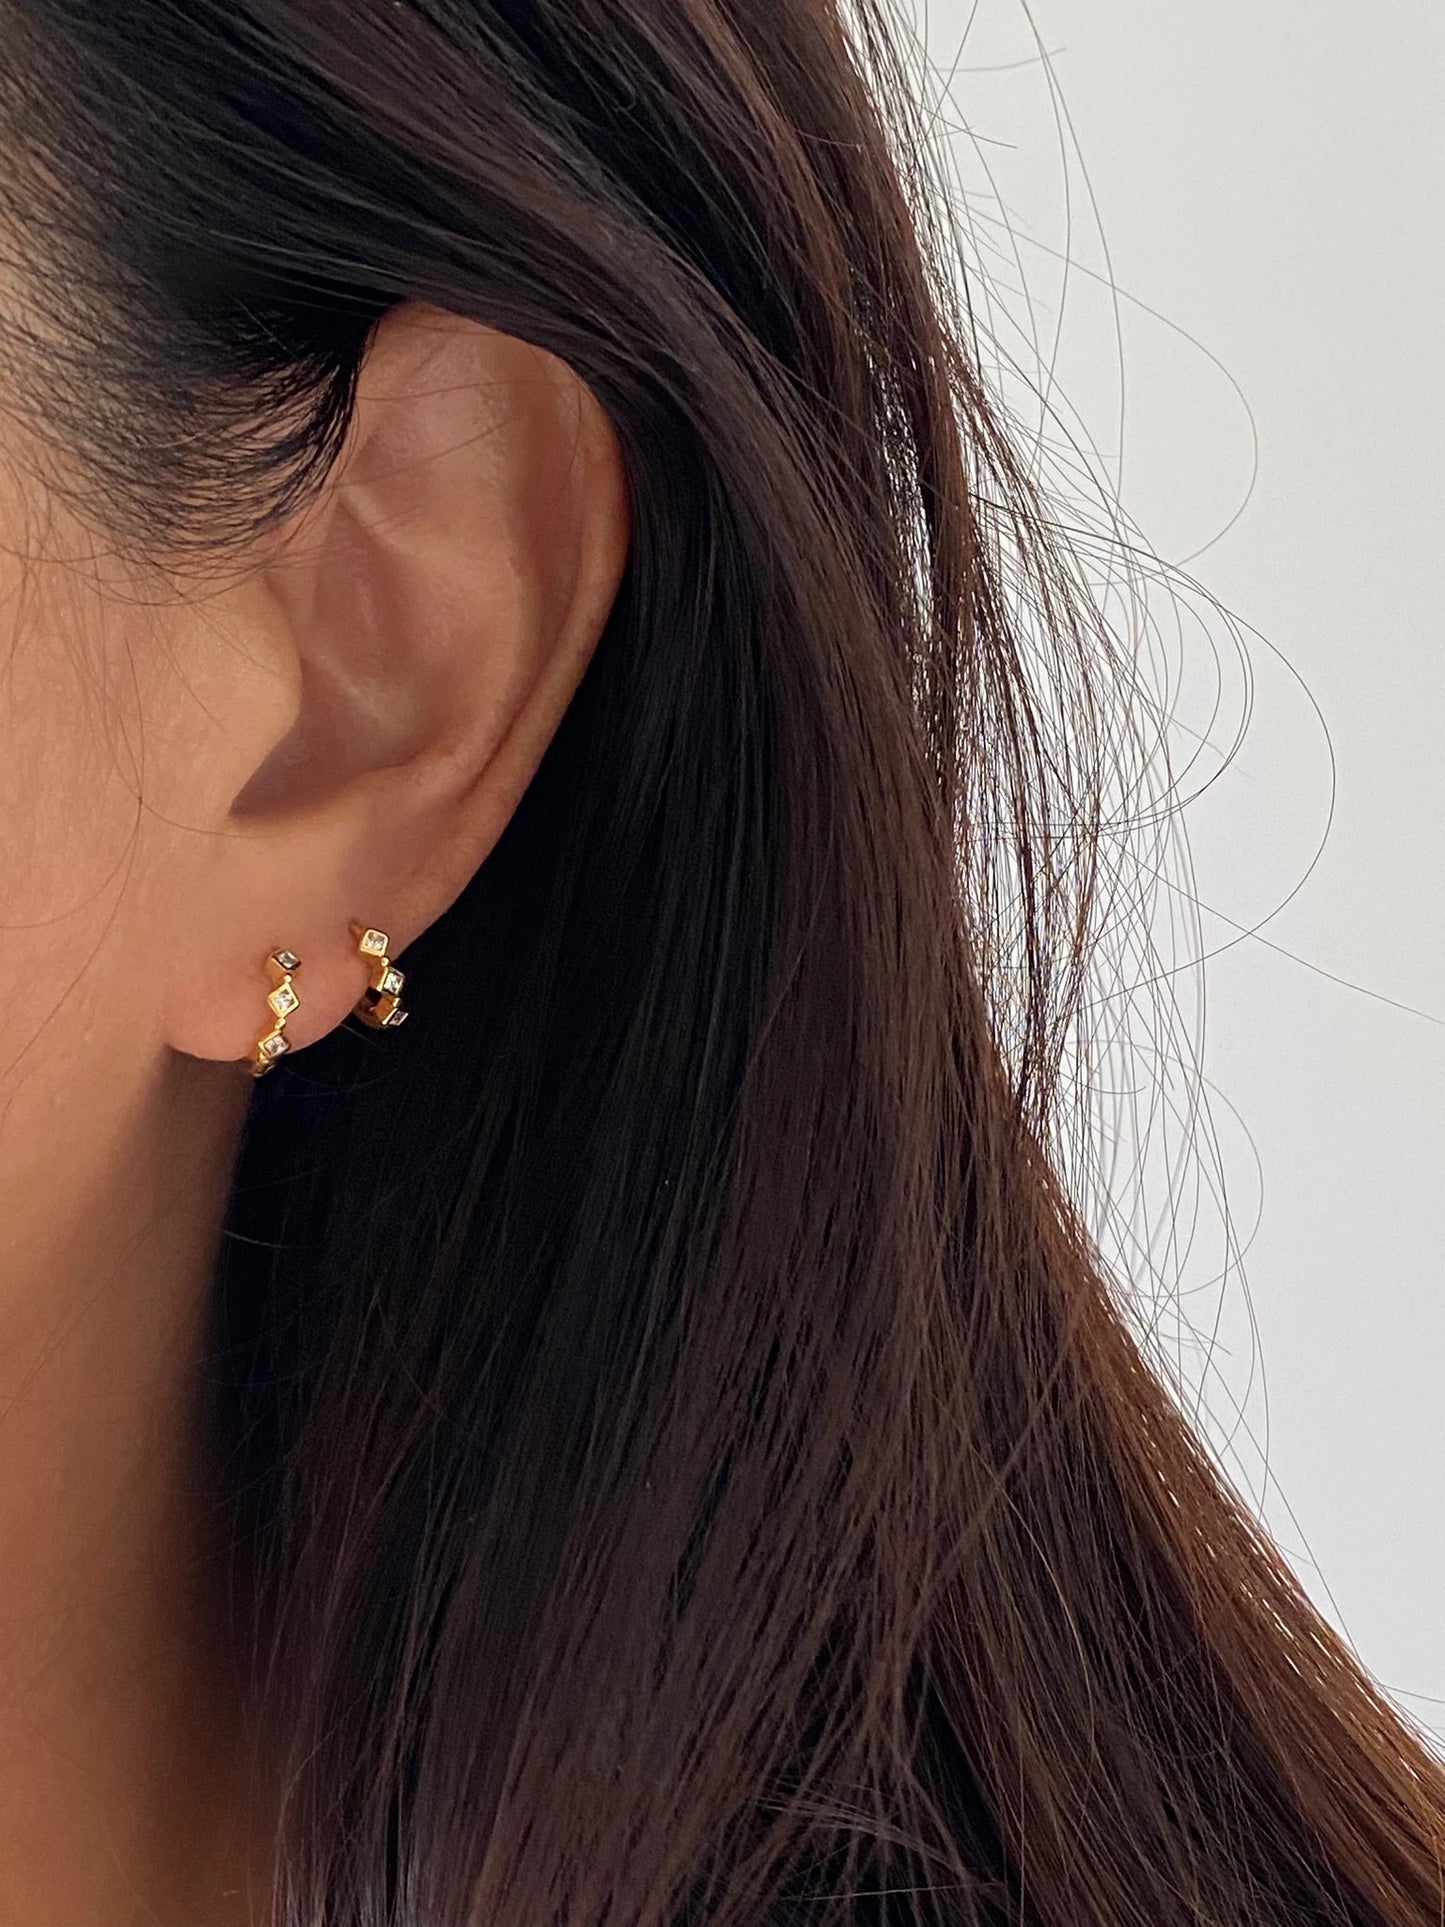 Gold Hoop Earrings with Cubic Dimond shape accents